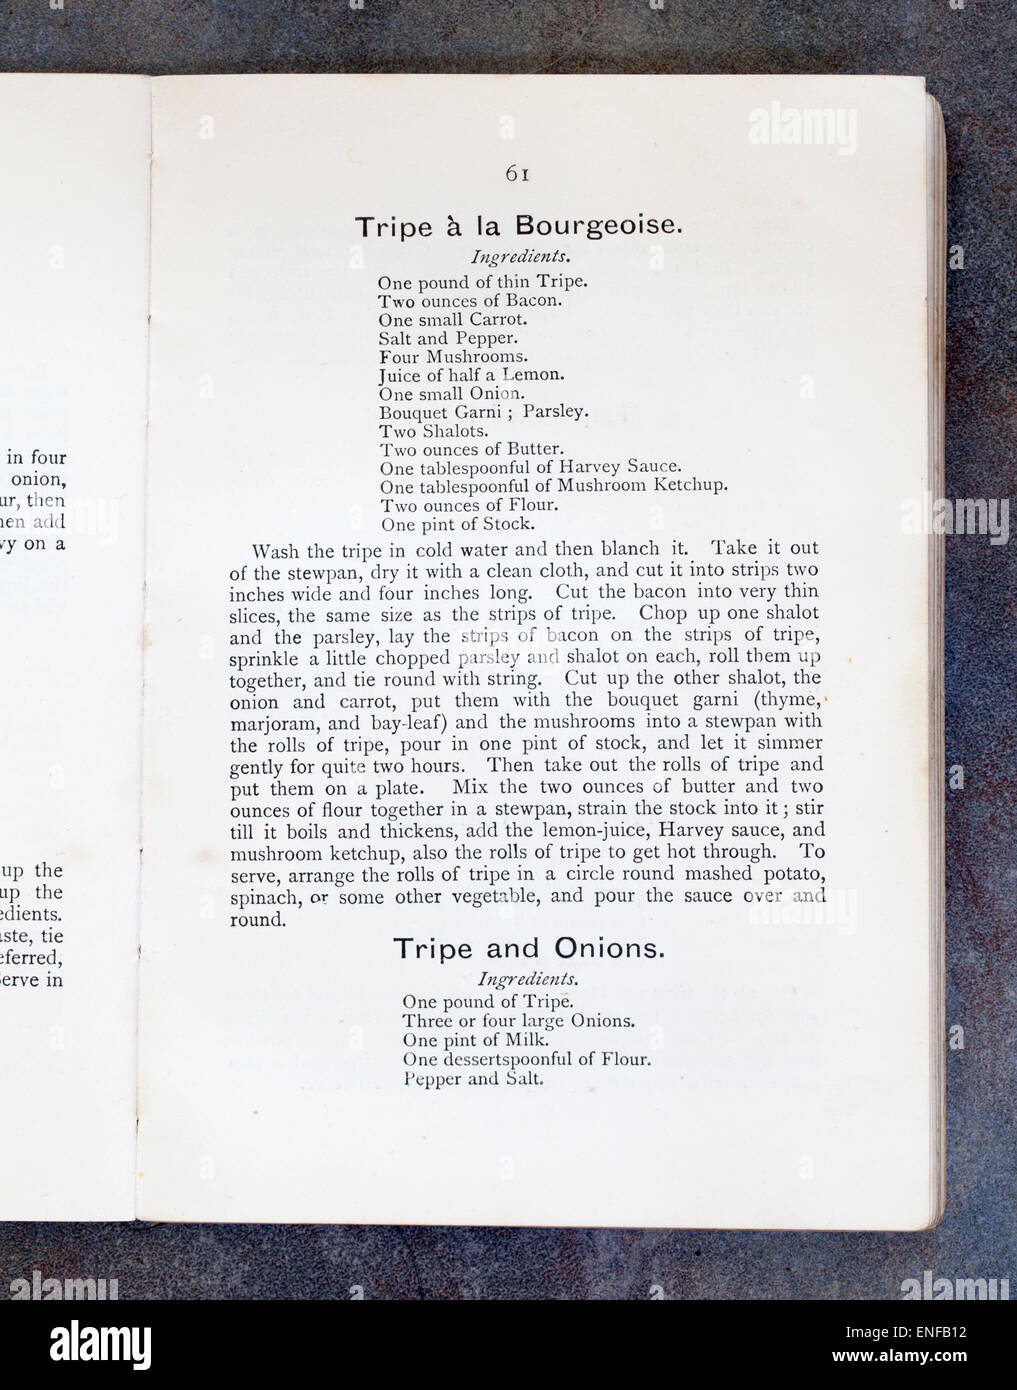 Tripe Recipes from Plain Cookery Recipes Book by Mrs Charles Clarke for the National Training School for Cookery Stock Photo